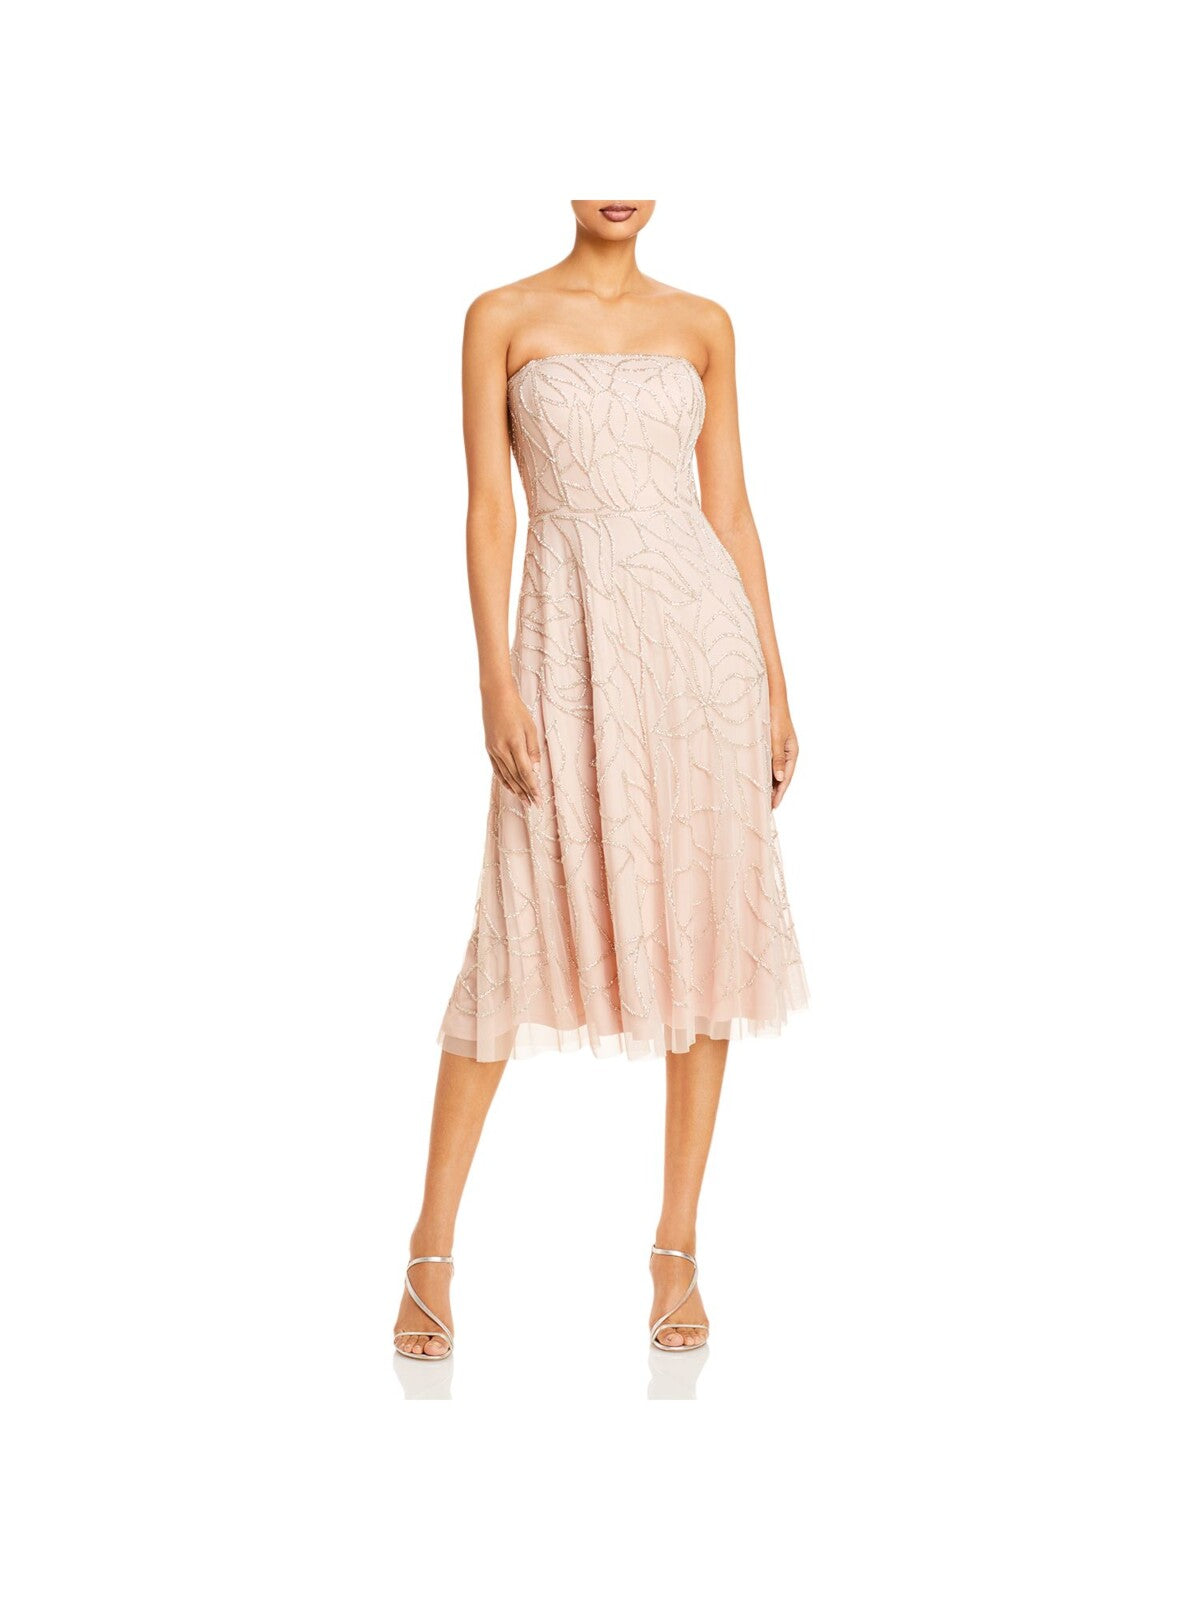 AIDAN MATTOX Womens Pink Beaded Zippered Sheer Lined Printed Sleeveless Strapless Below The Knee Cocktail Fit + Flare Dress 8